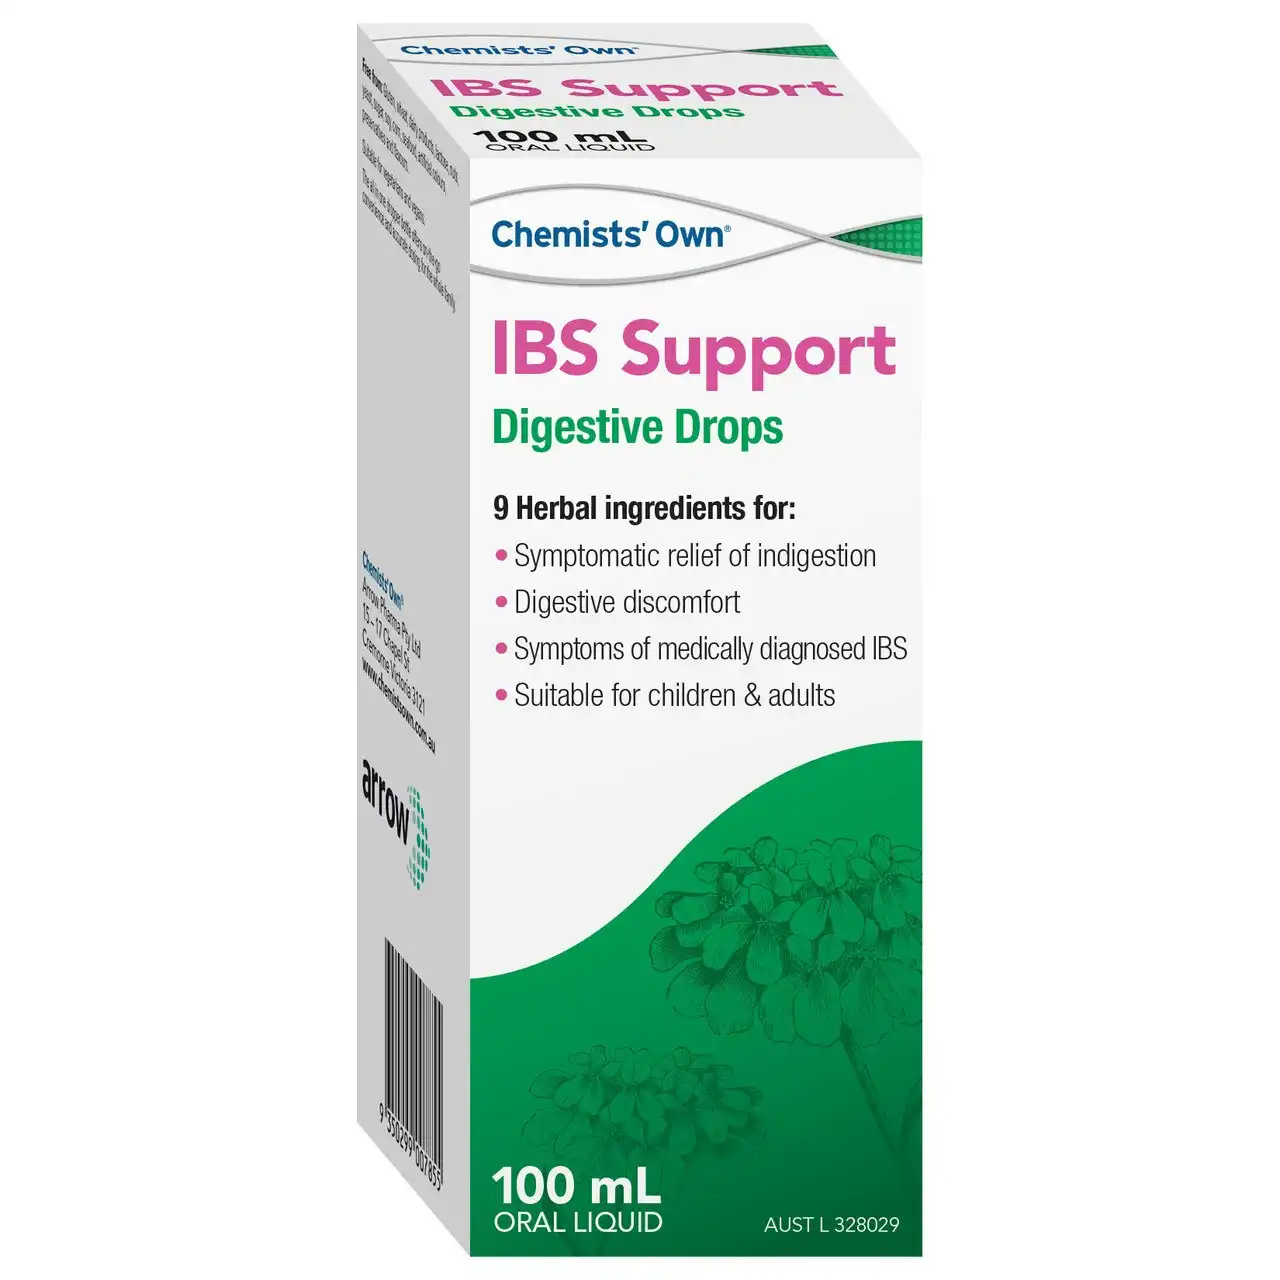 Chemists Own IBS Support Digestive Drops 100ml